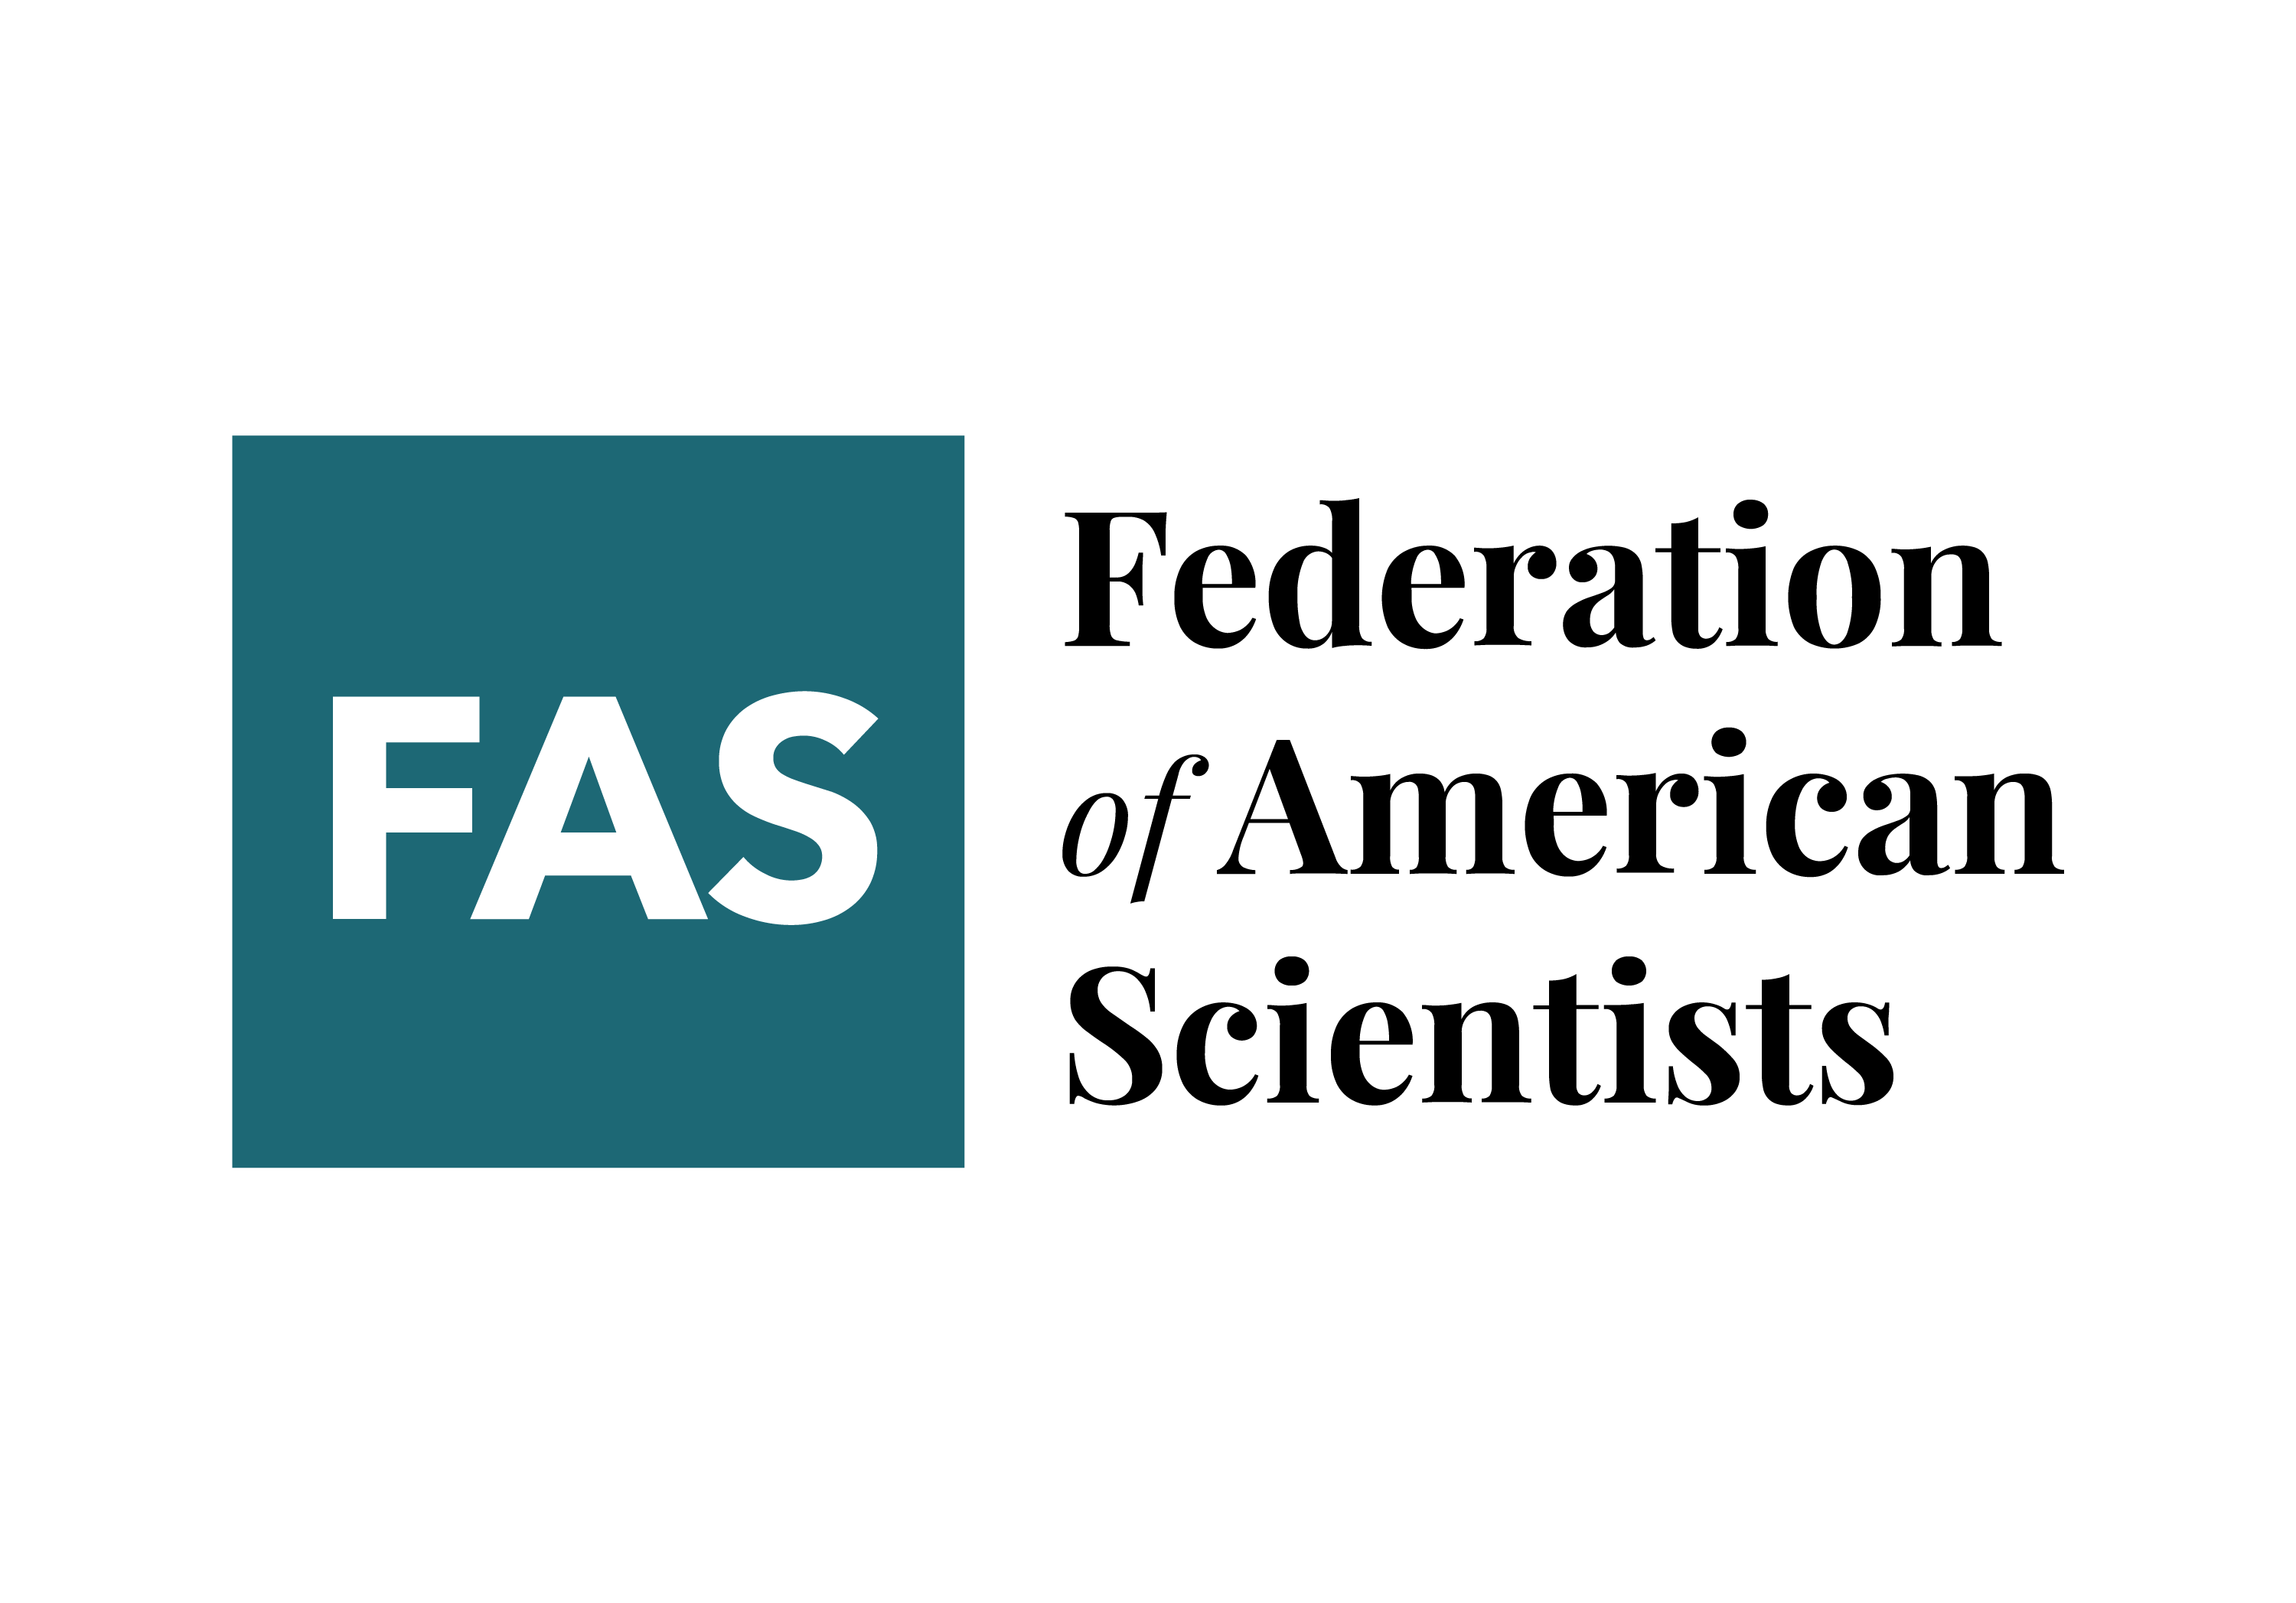 Federation of American Scientists FAS